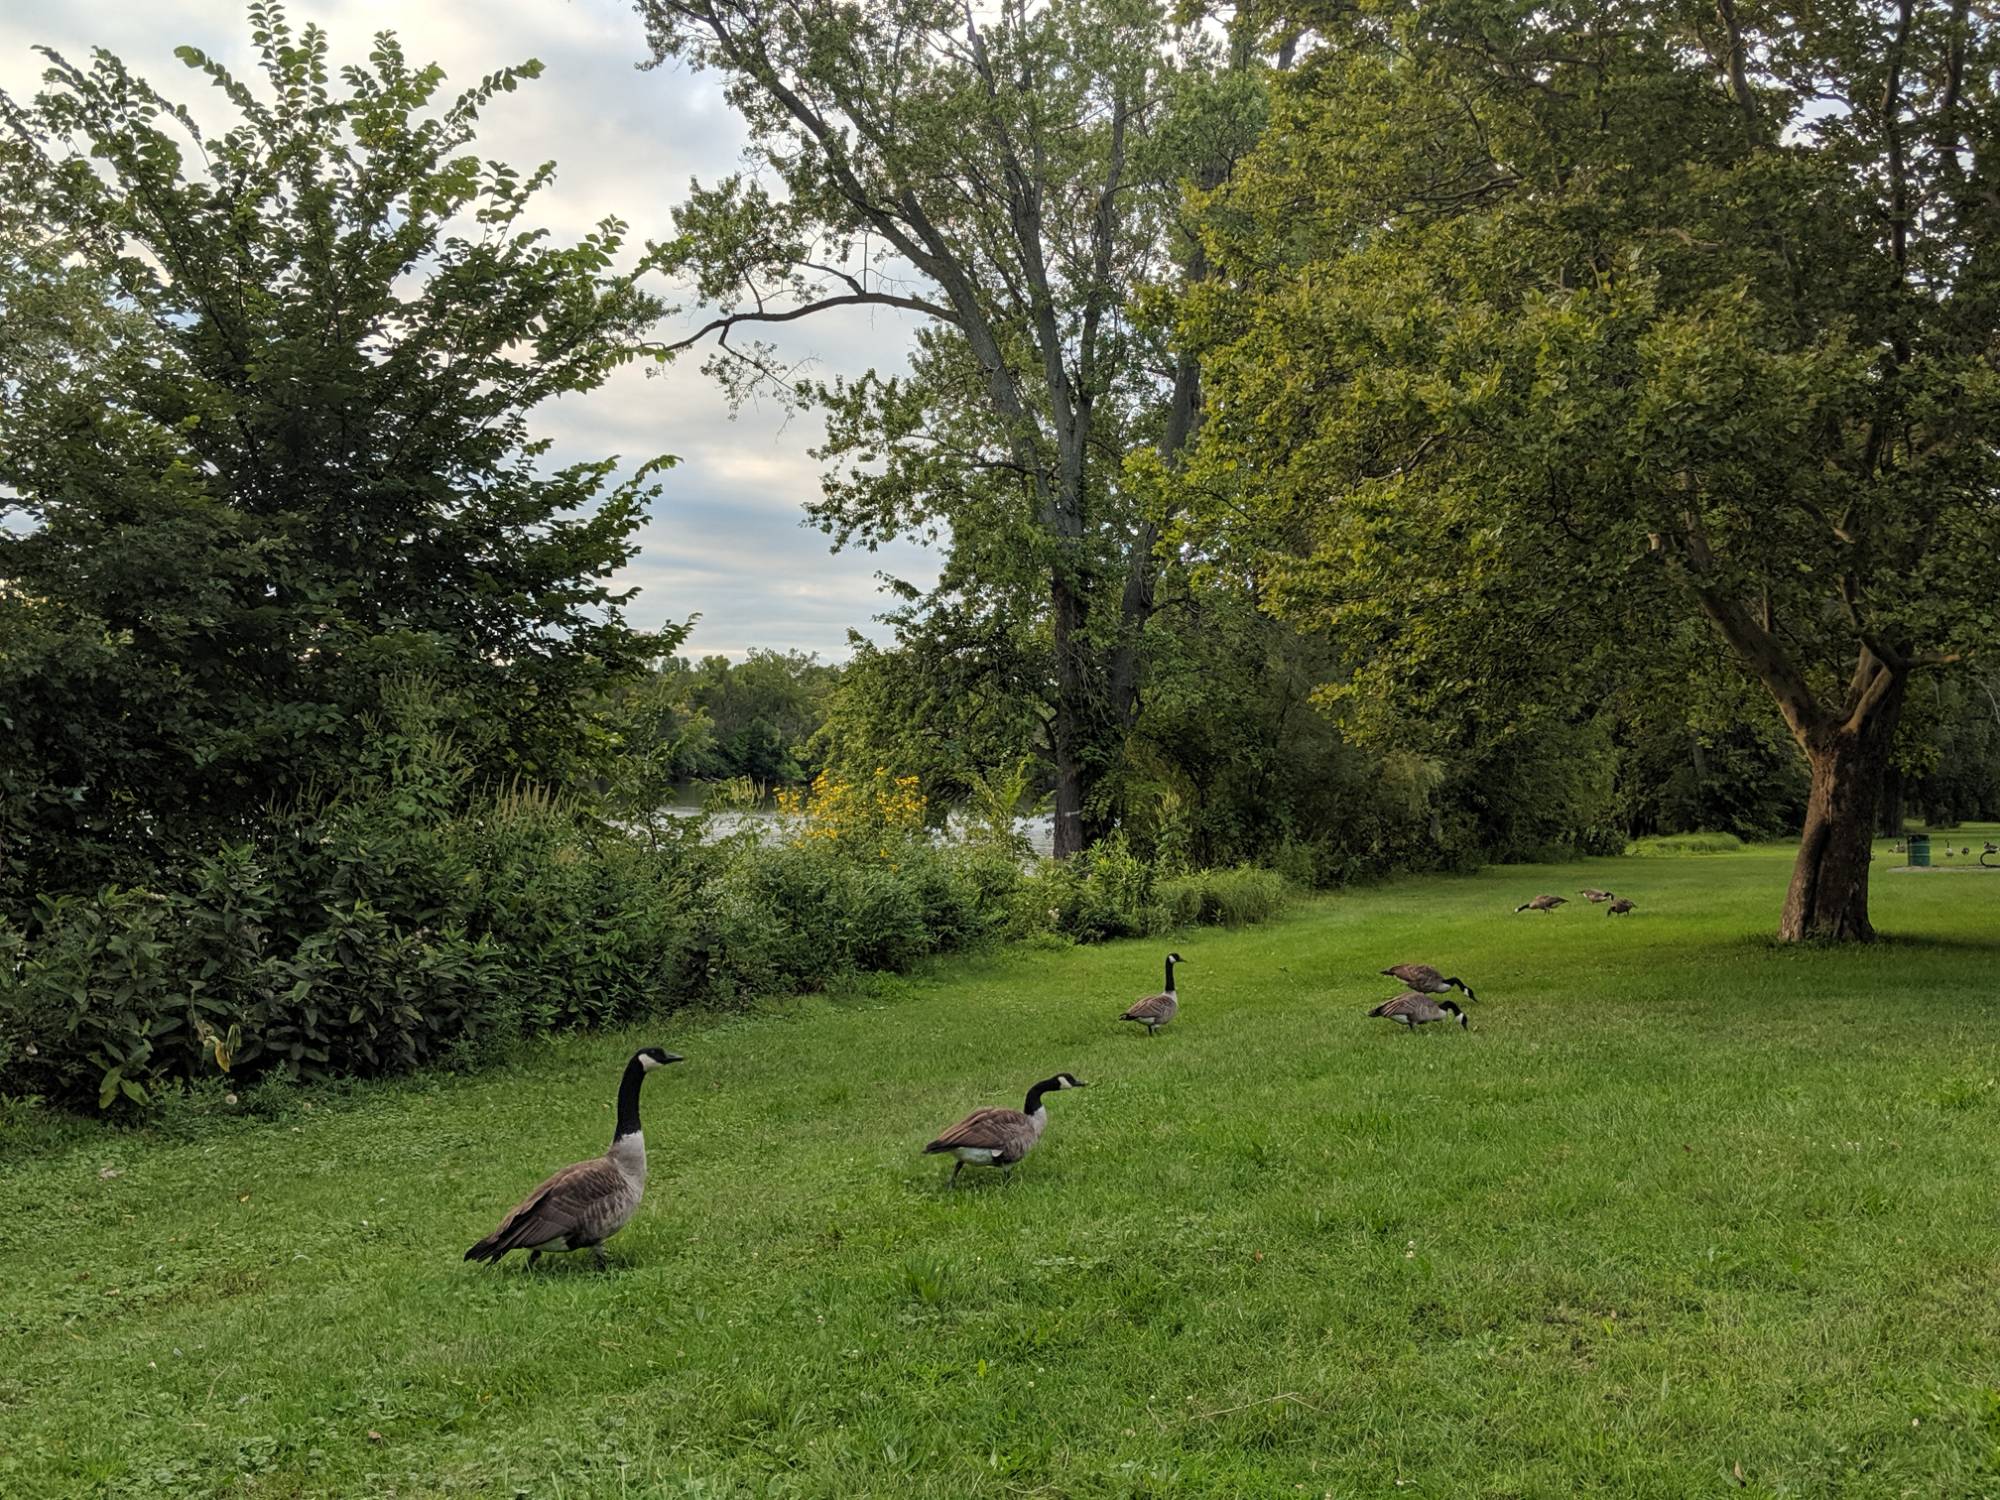 Geese in park